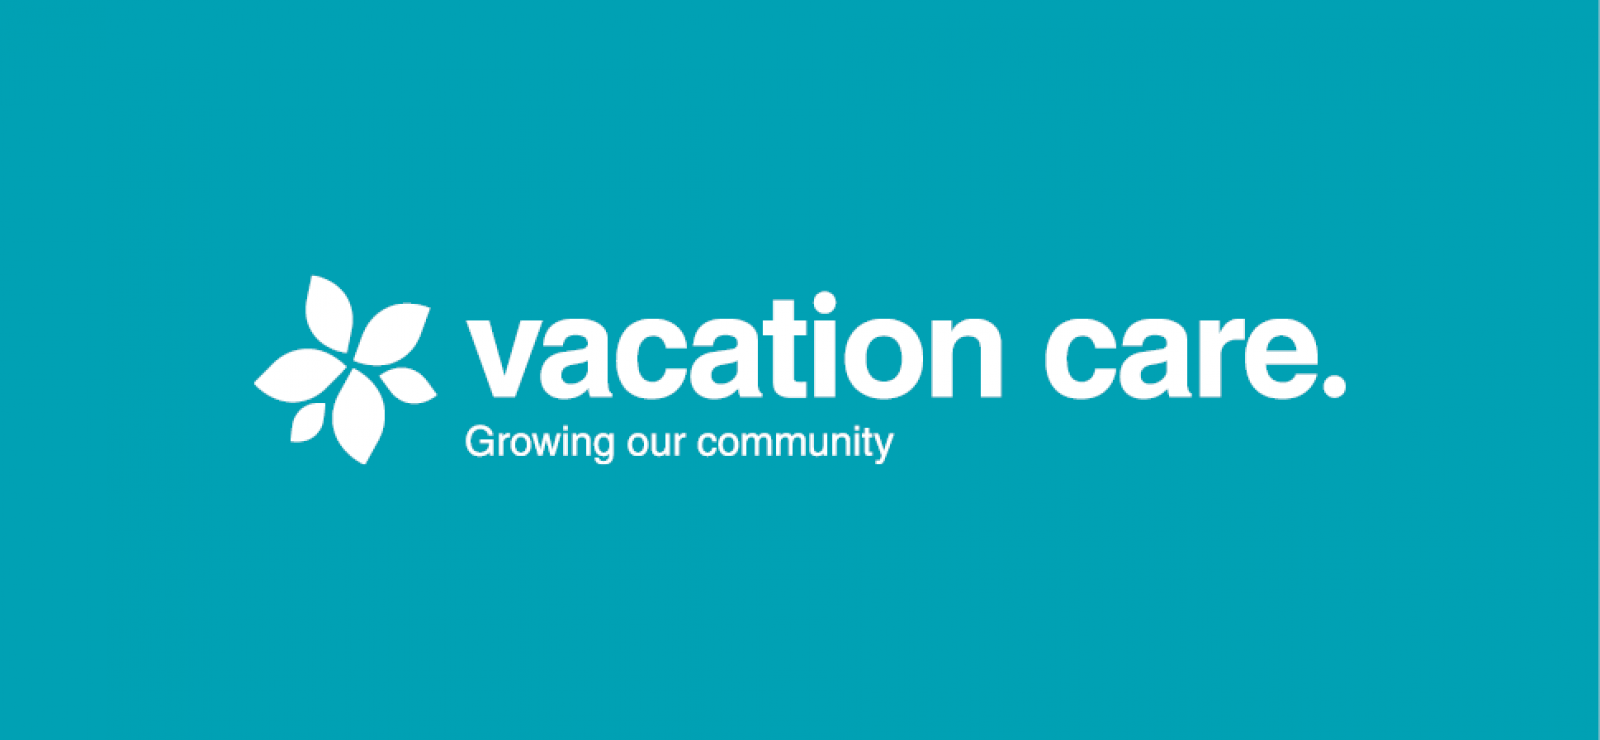 Vacation care logo on a dark blue background  banner image